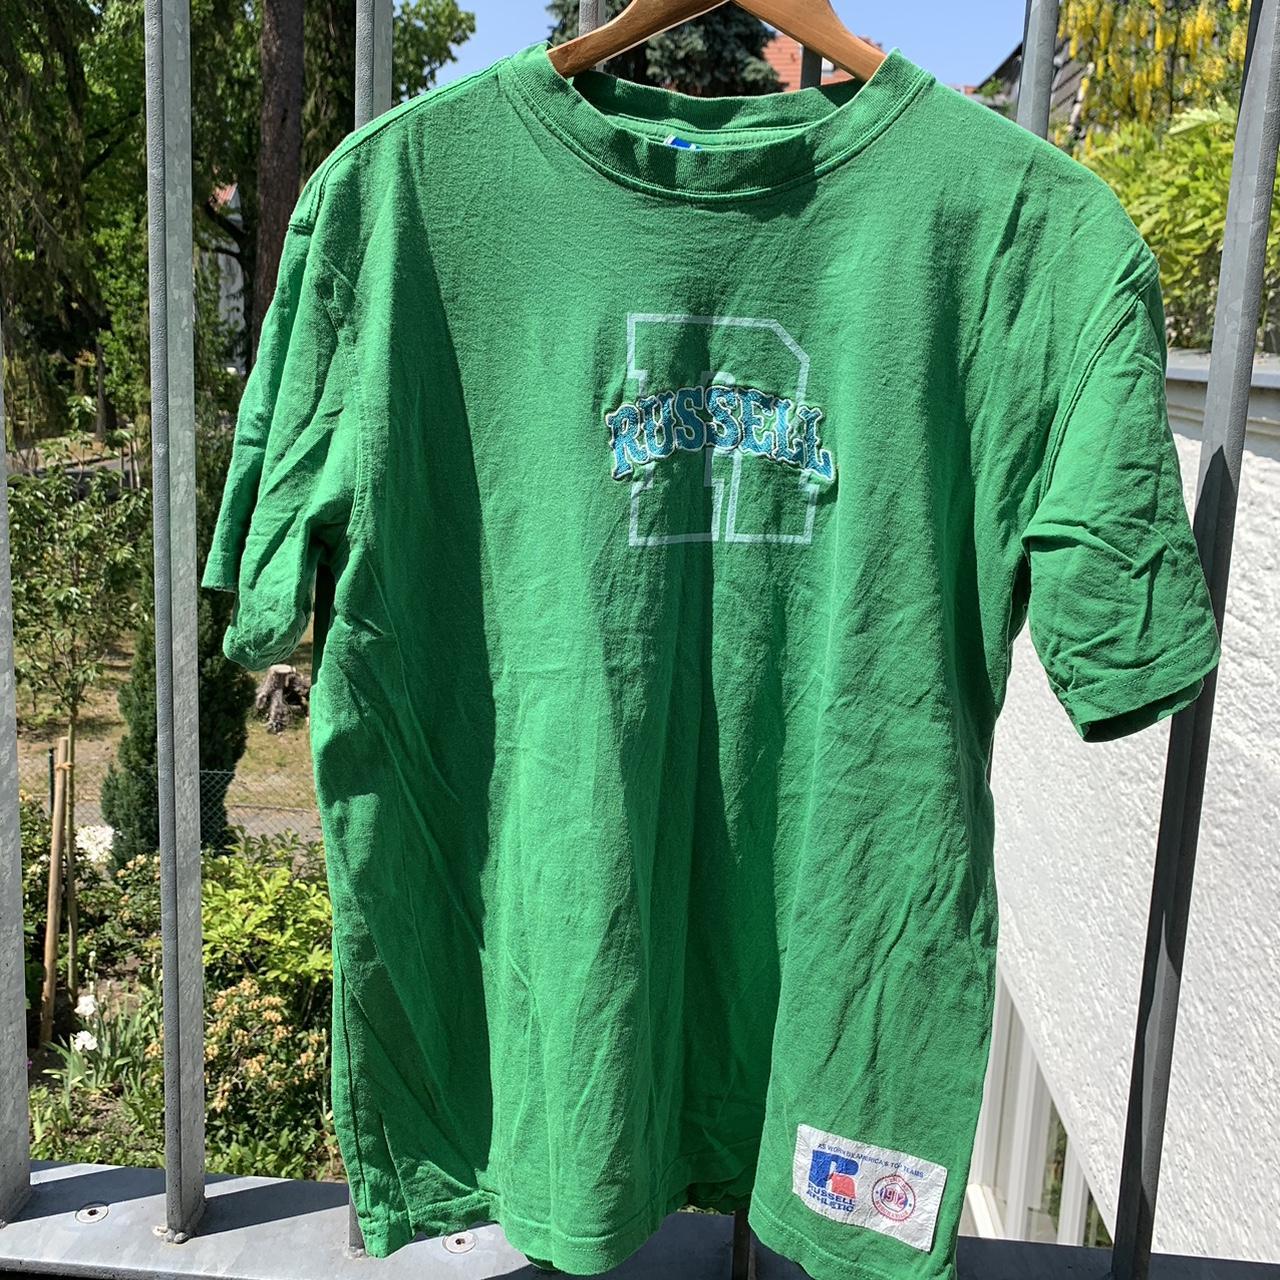 Russell Athletic Men's Blue and Green T-shirt | Depop